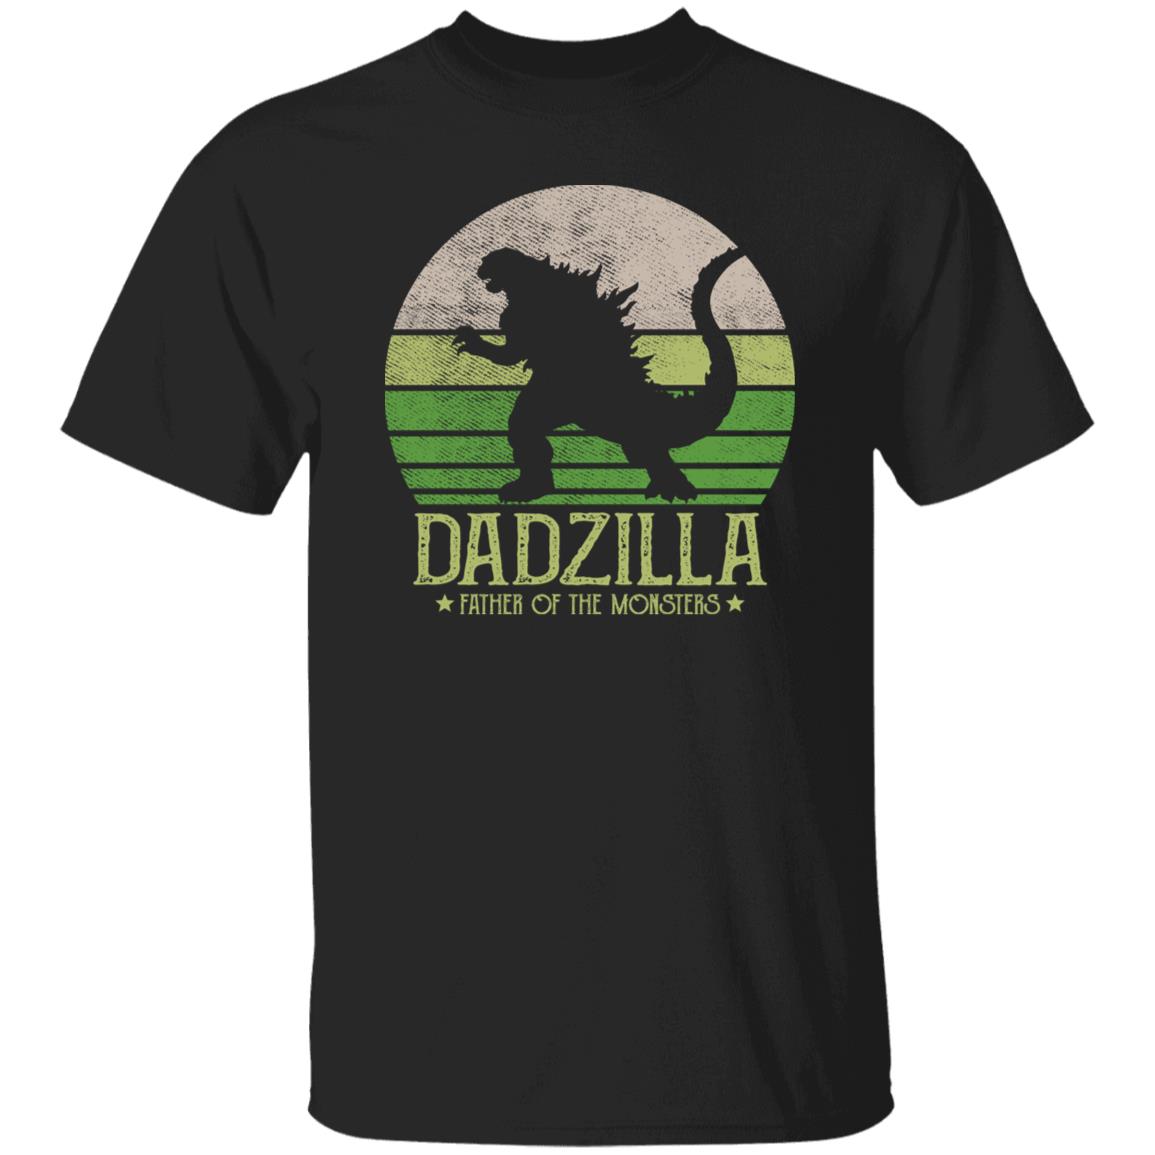 Dadzilla father of the monsters shirt funny dad tee black navy dark heather-Family-Gift-Planet